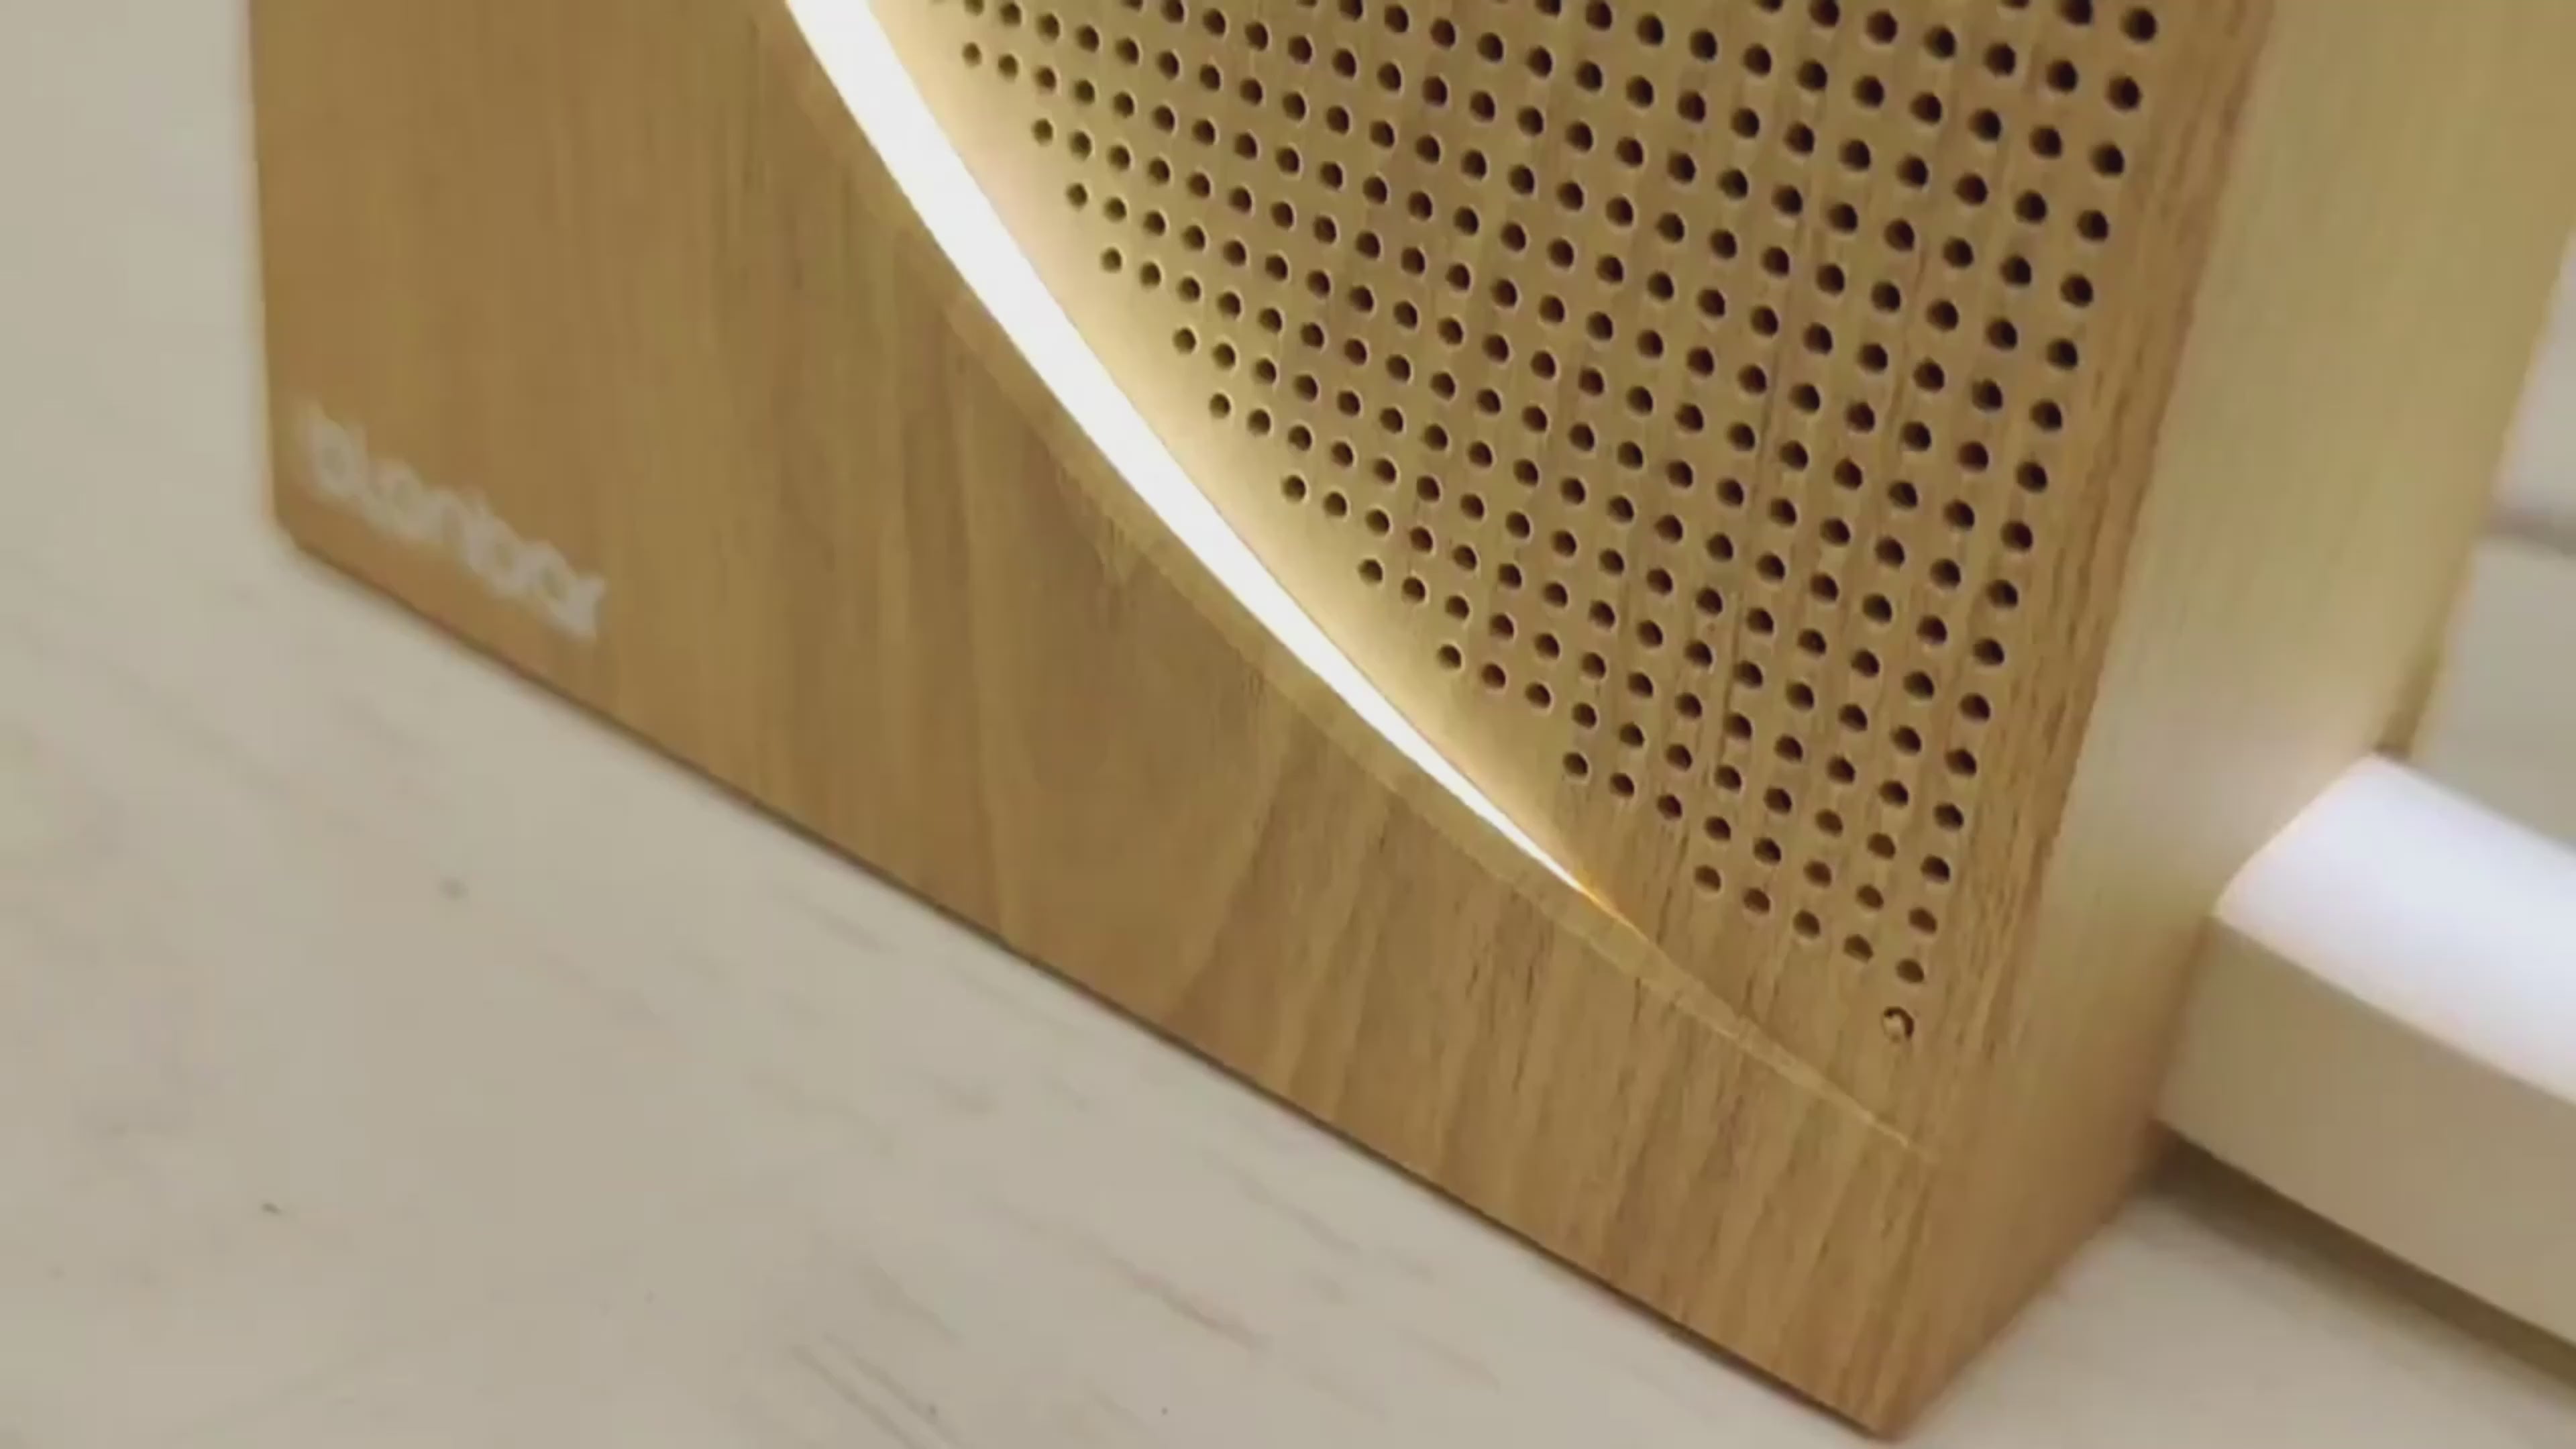 Load video: SereneRise lamp introduction video. Shows different brightness, usb charging and alarm clock settings.